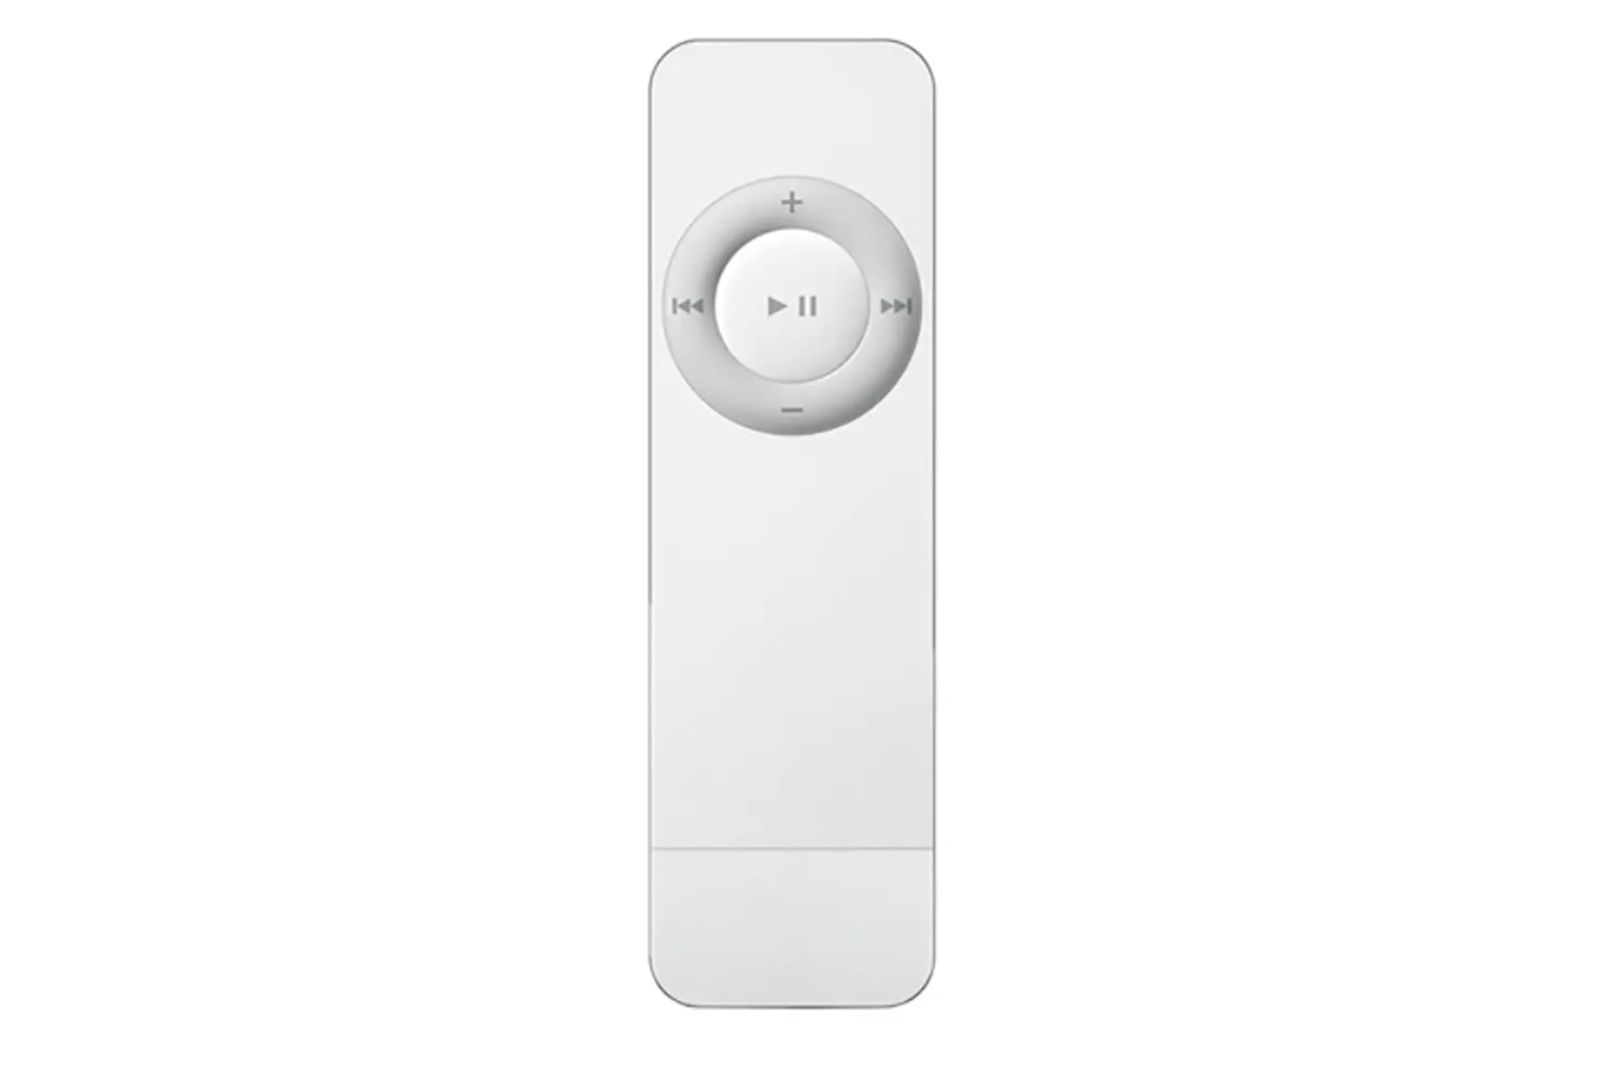 Every Apple iPod Model over the years (2001 to 2022) photo 6